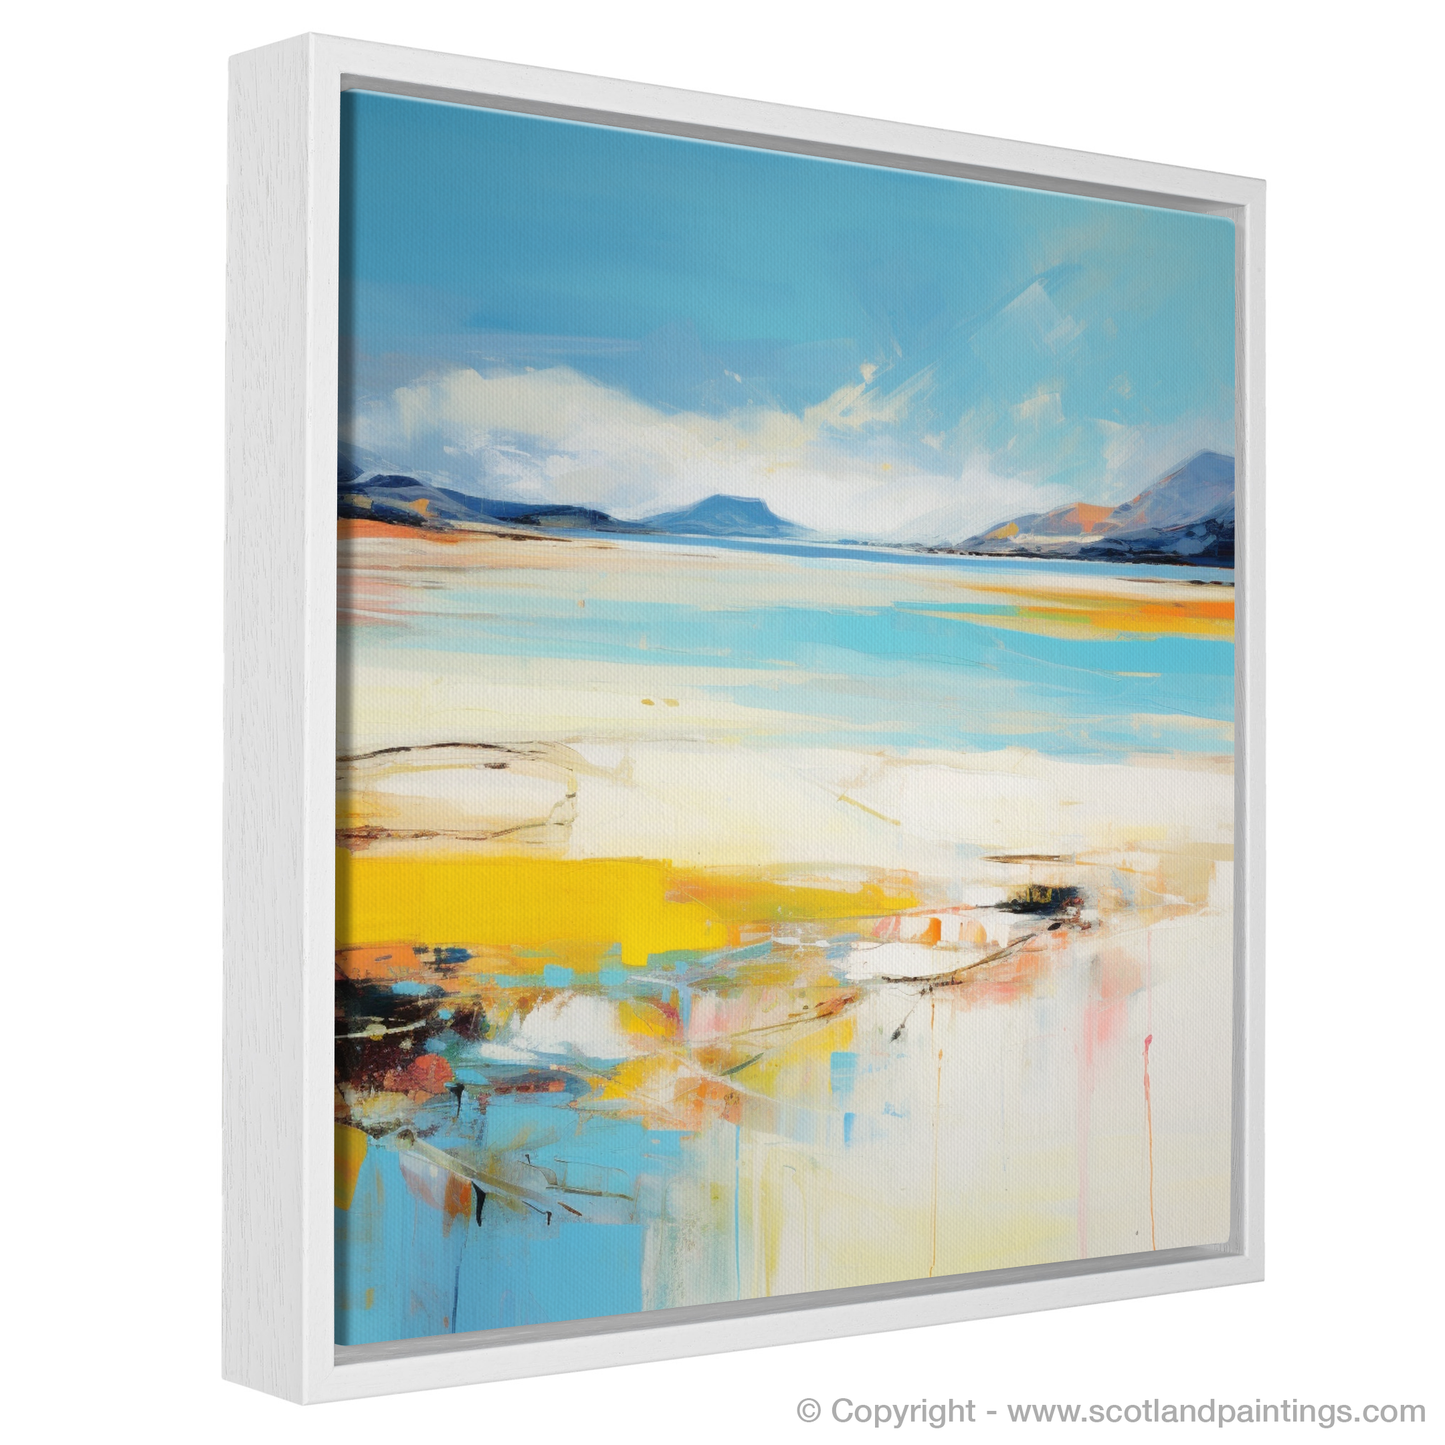 Painting and Art Print of Luskentyre Beach, Isle of Harris in summer entitled "Vibrant Horizons: An Abstract Ode to Luskentyre Beach".